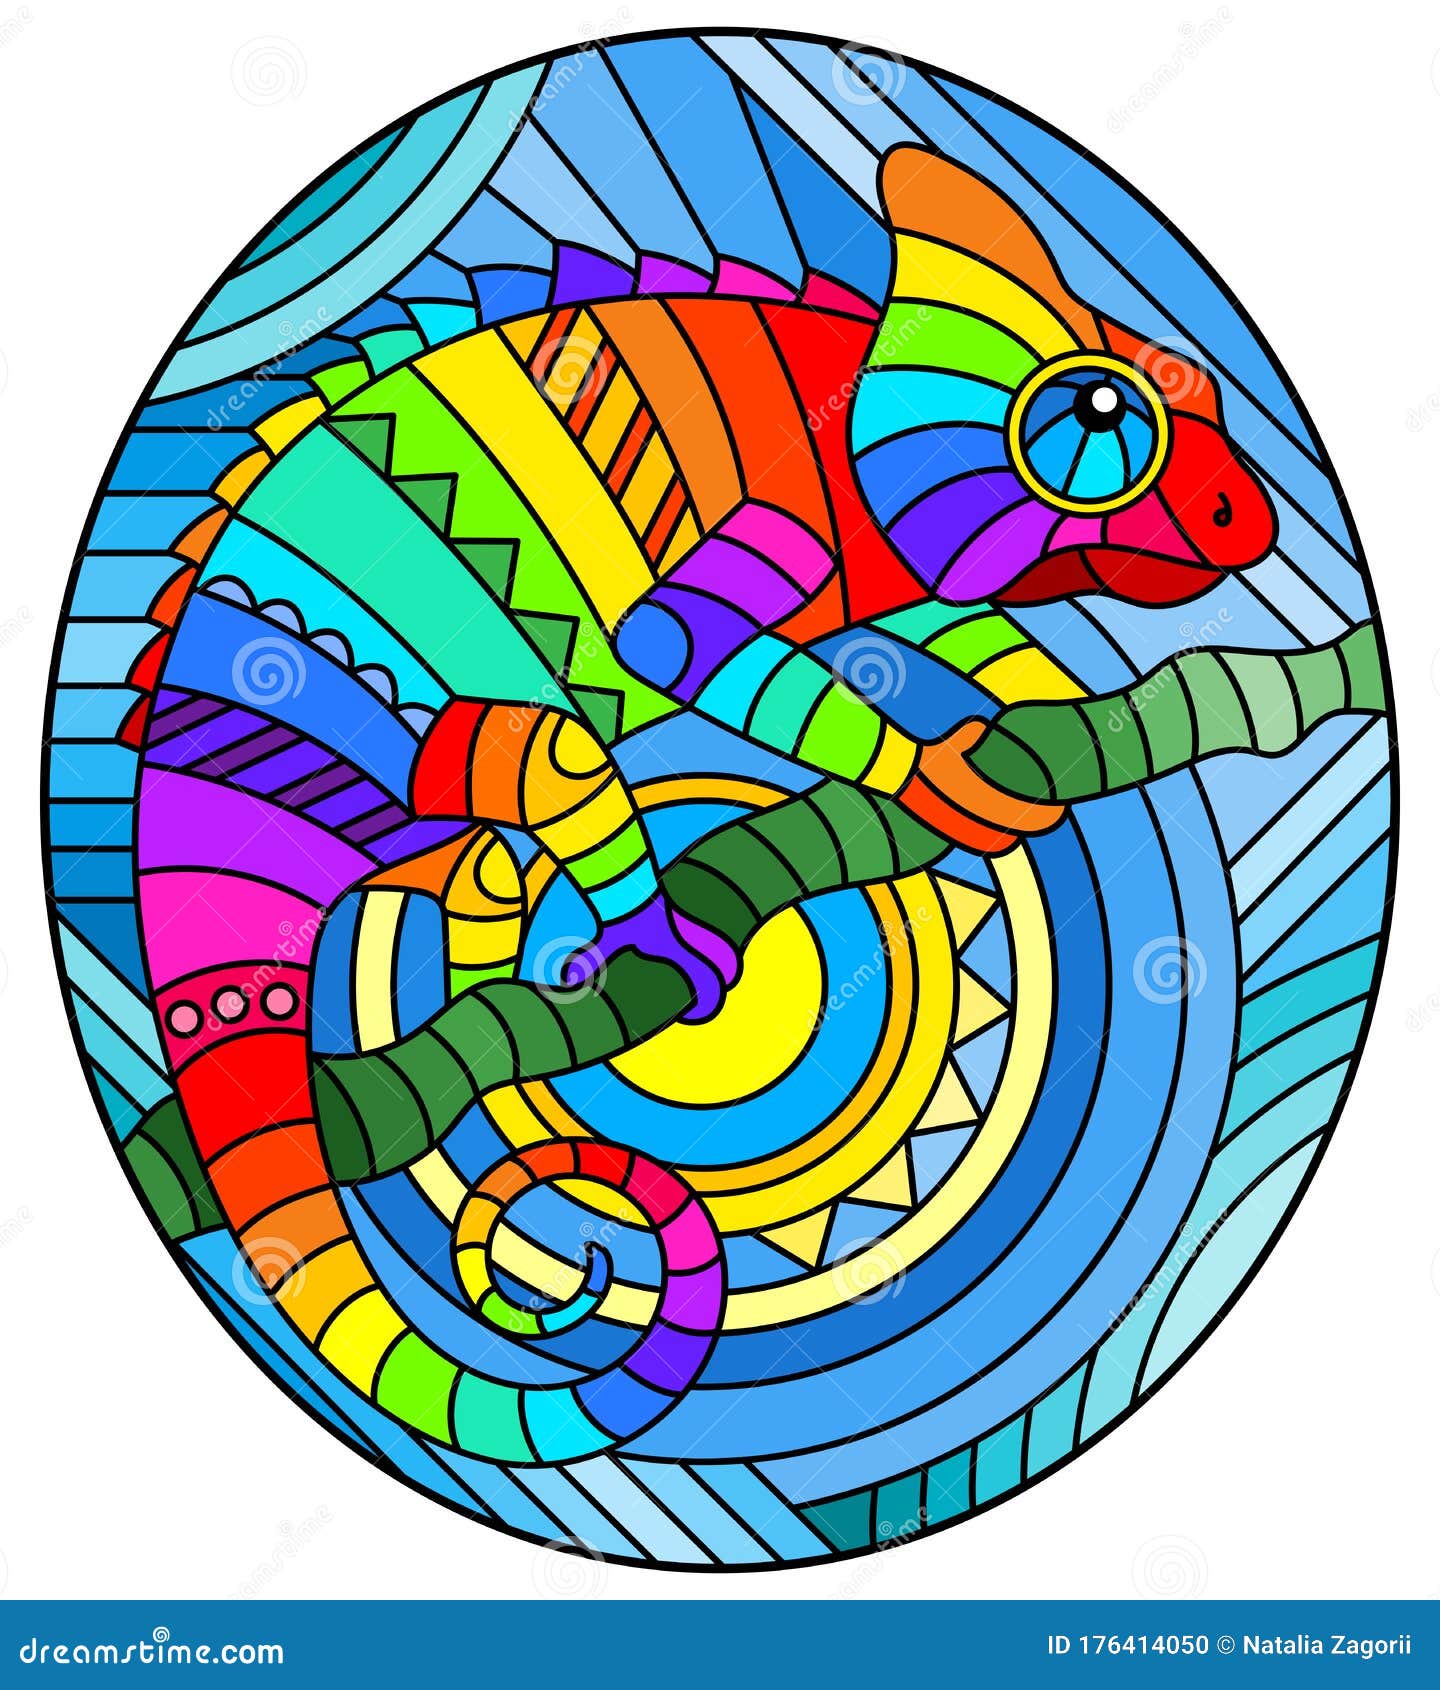 Illustration in Stained Glass Style with Abstract Geometric Rainbow